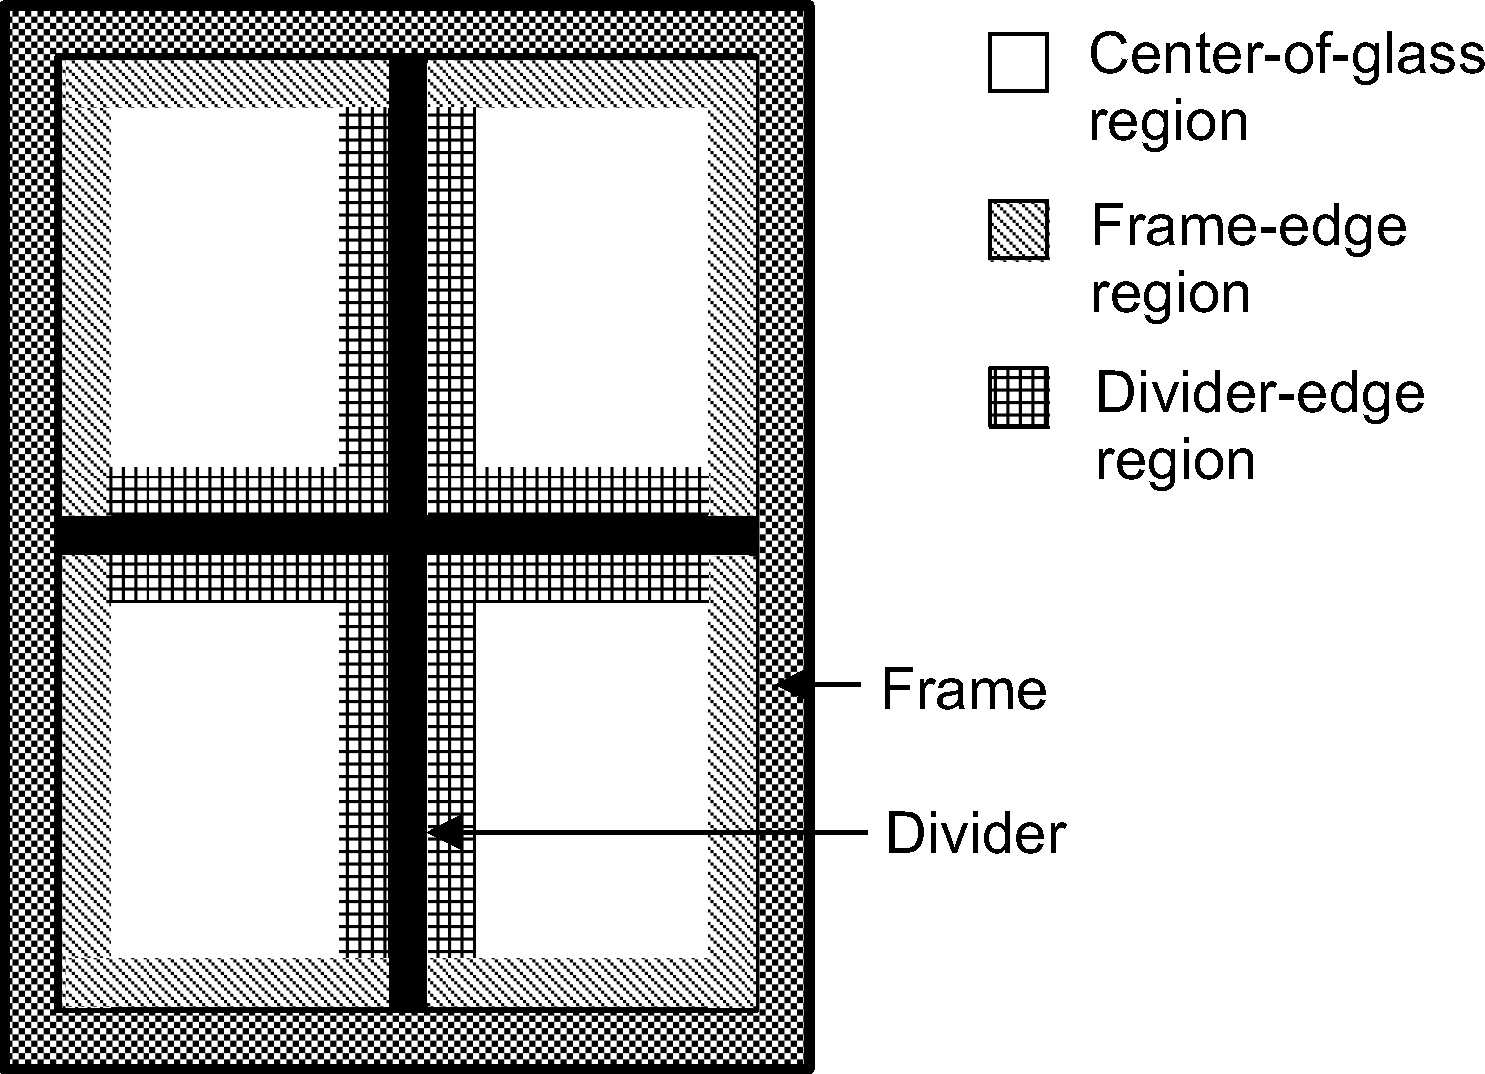 Different types of glass regions.